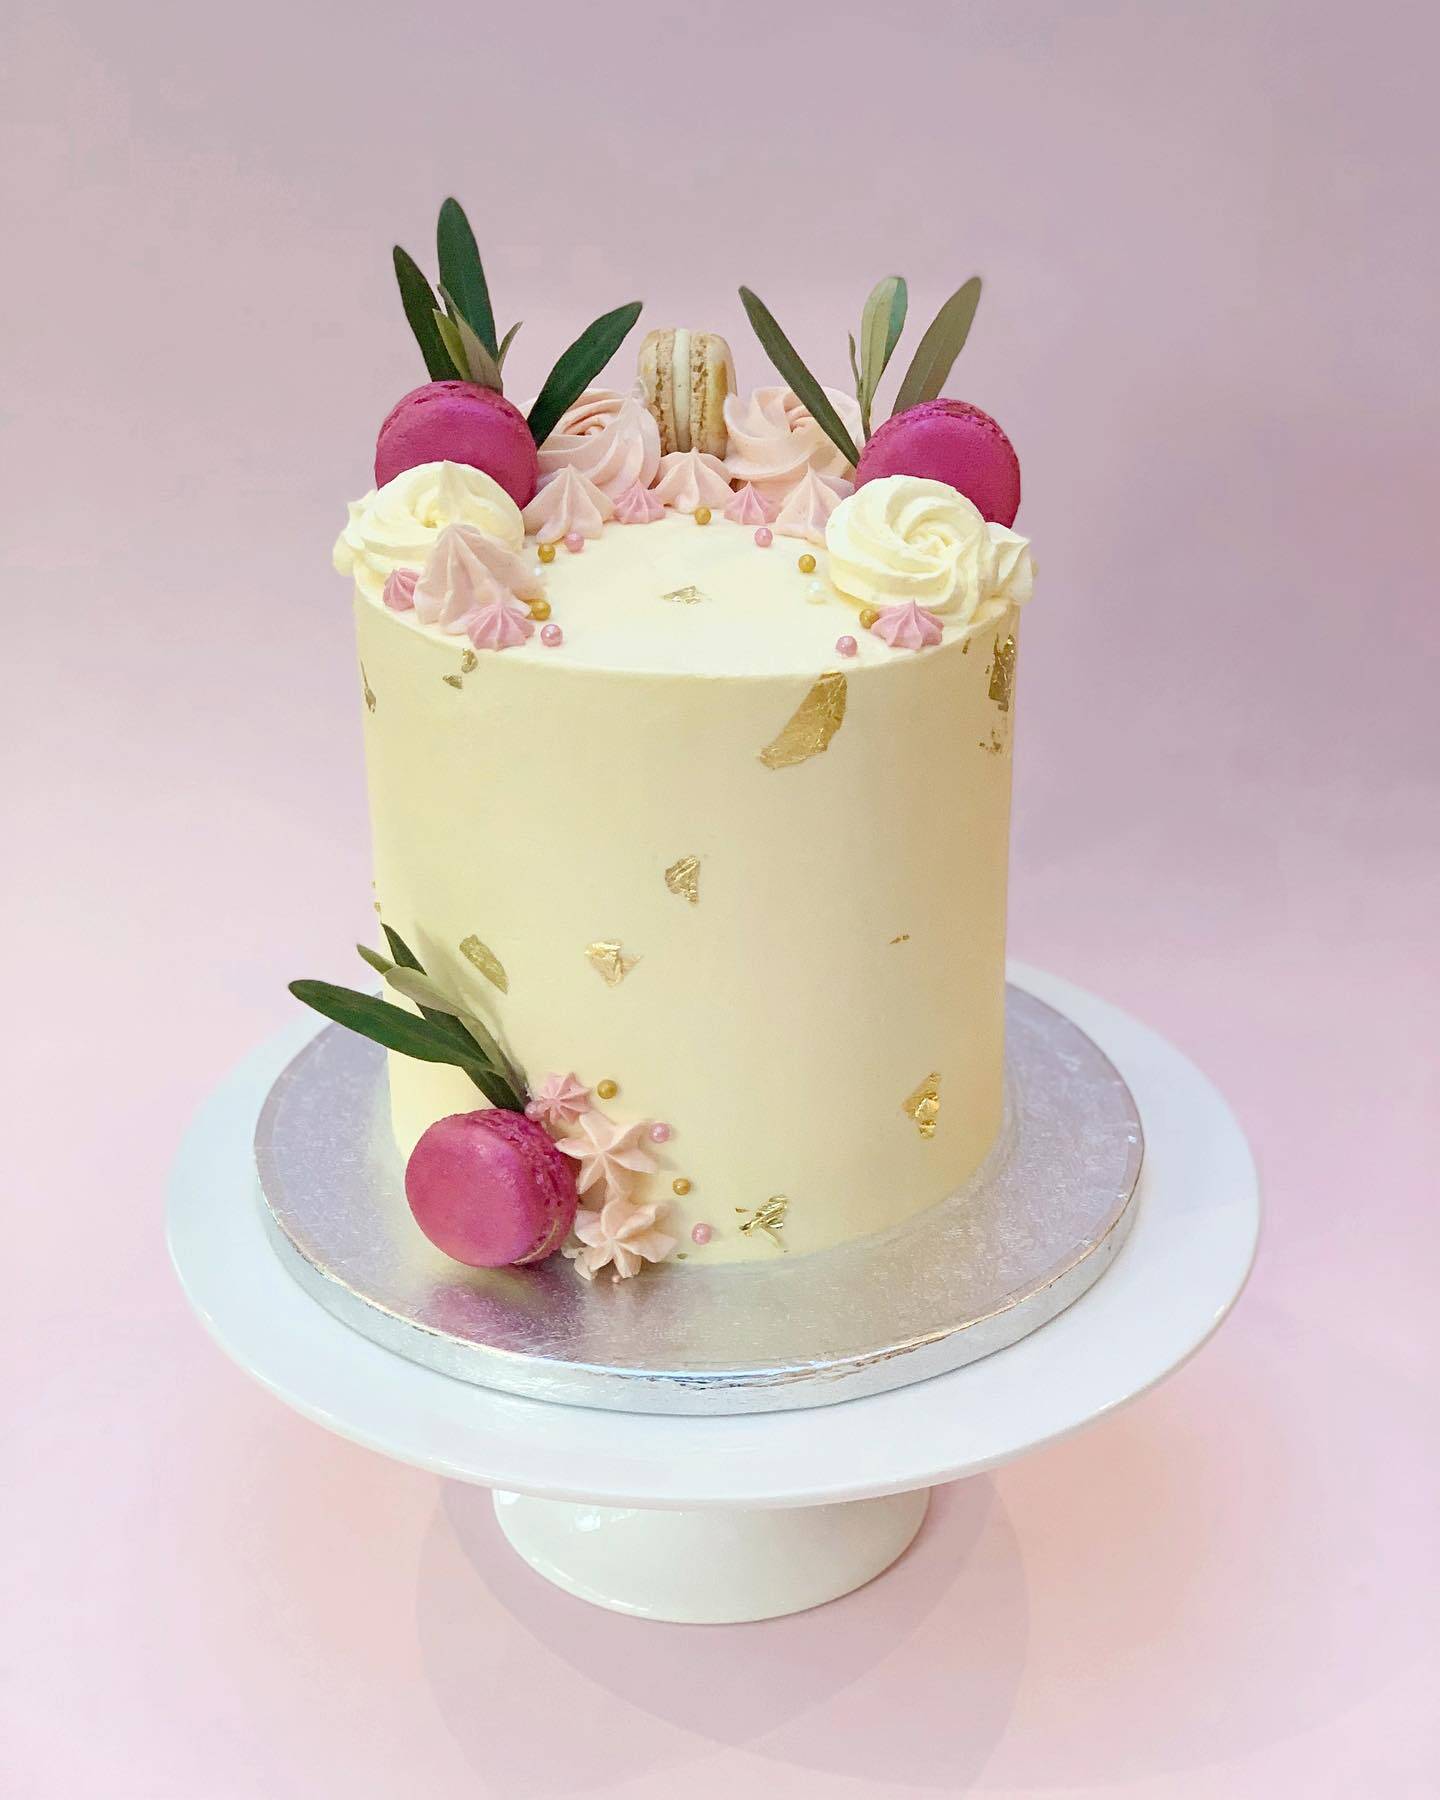 Pink macarons and gold leaf cake